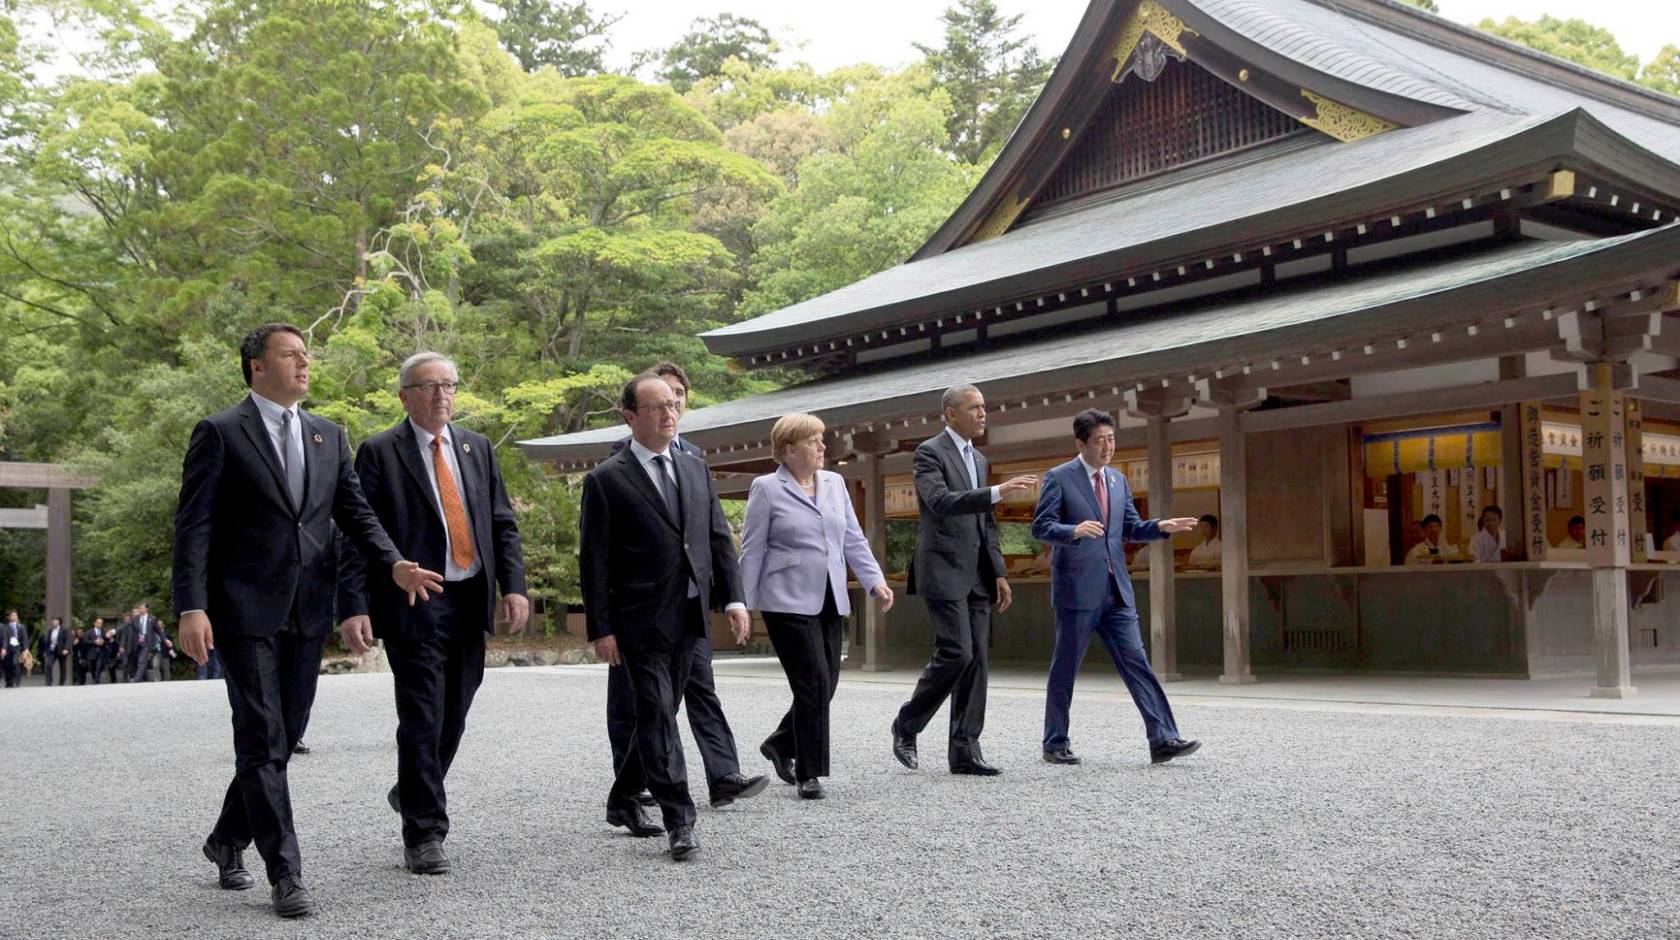 G7 summit in Ise-Shima Japan